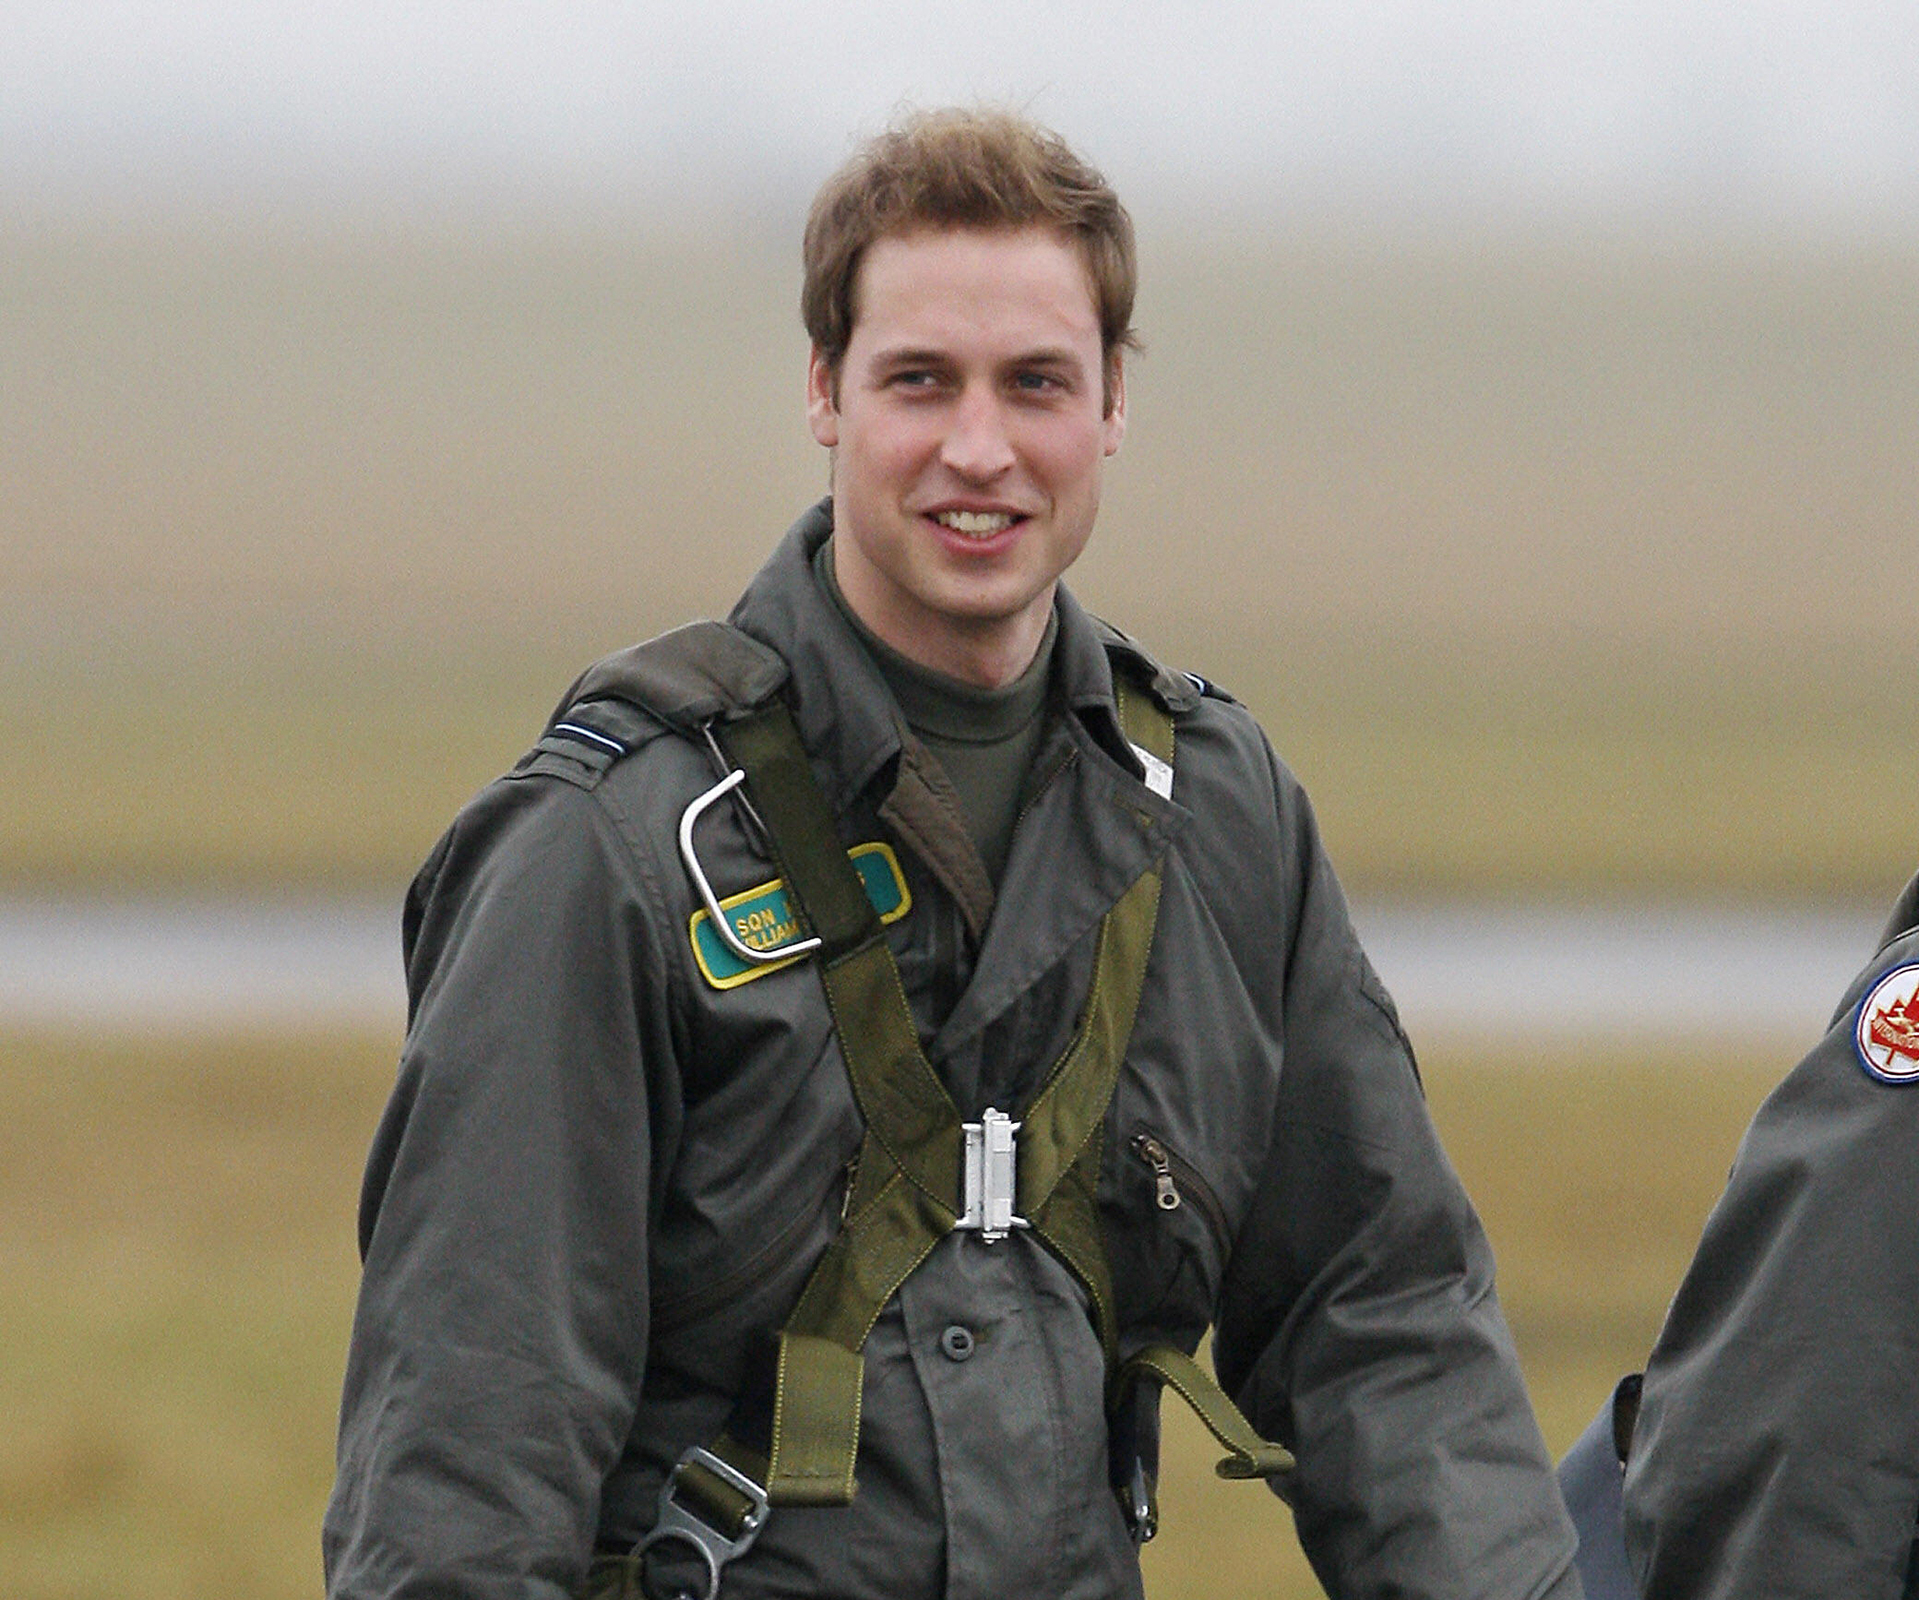 Prince William takes flight in new job with Bond Air Services